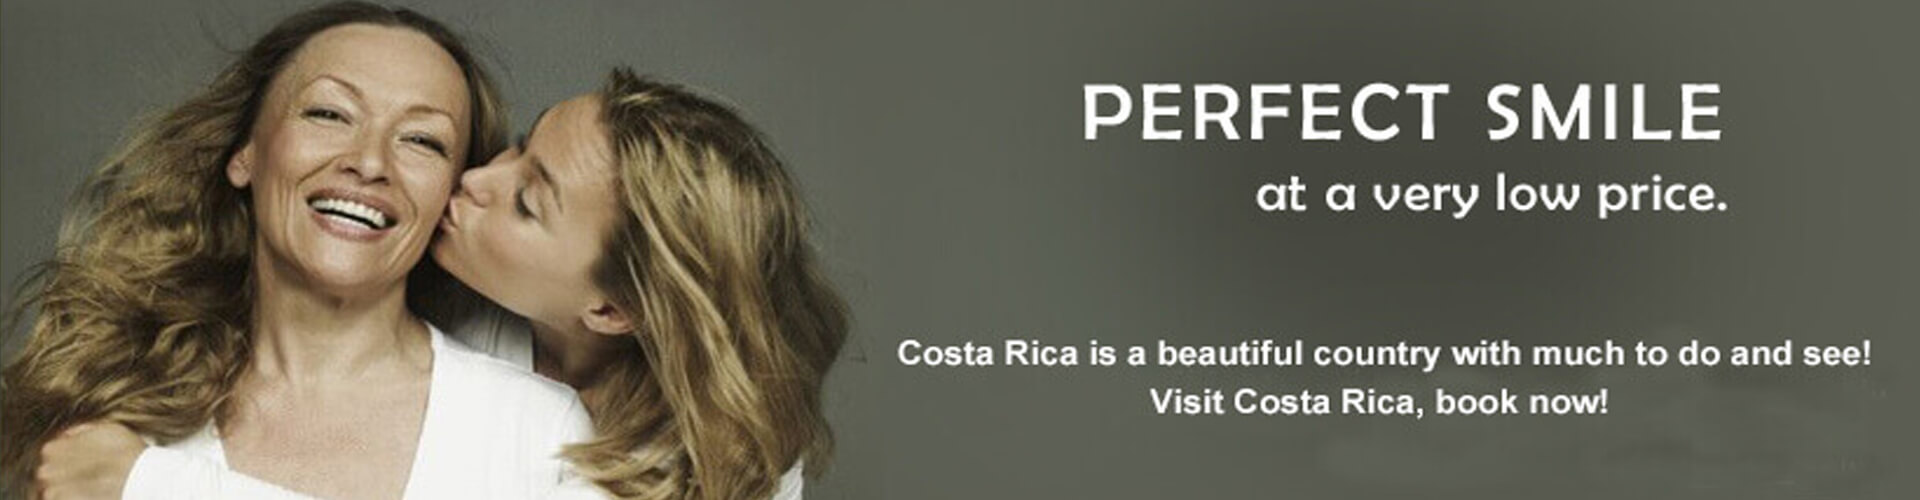 perfect smile in Costa Rica at a very low price.